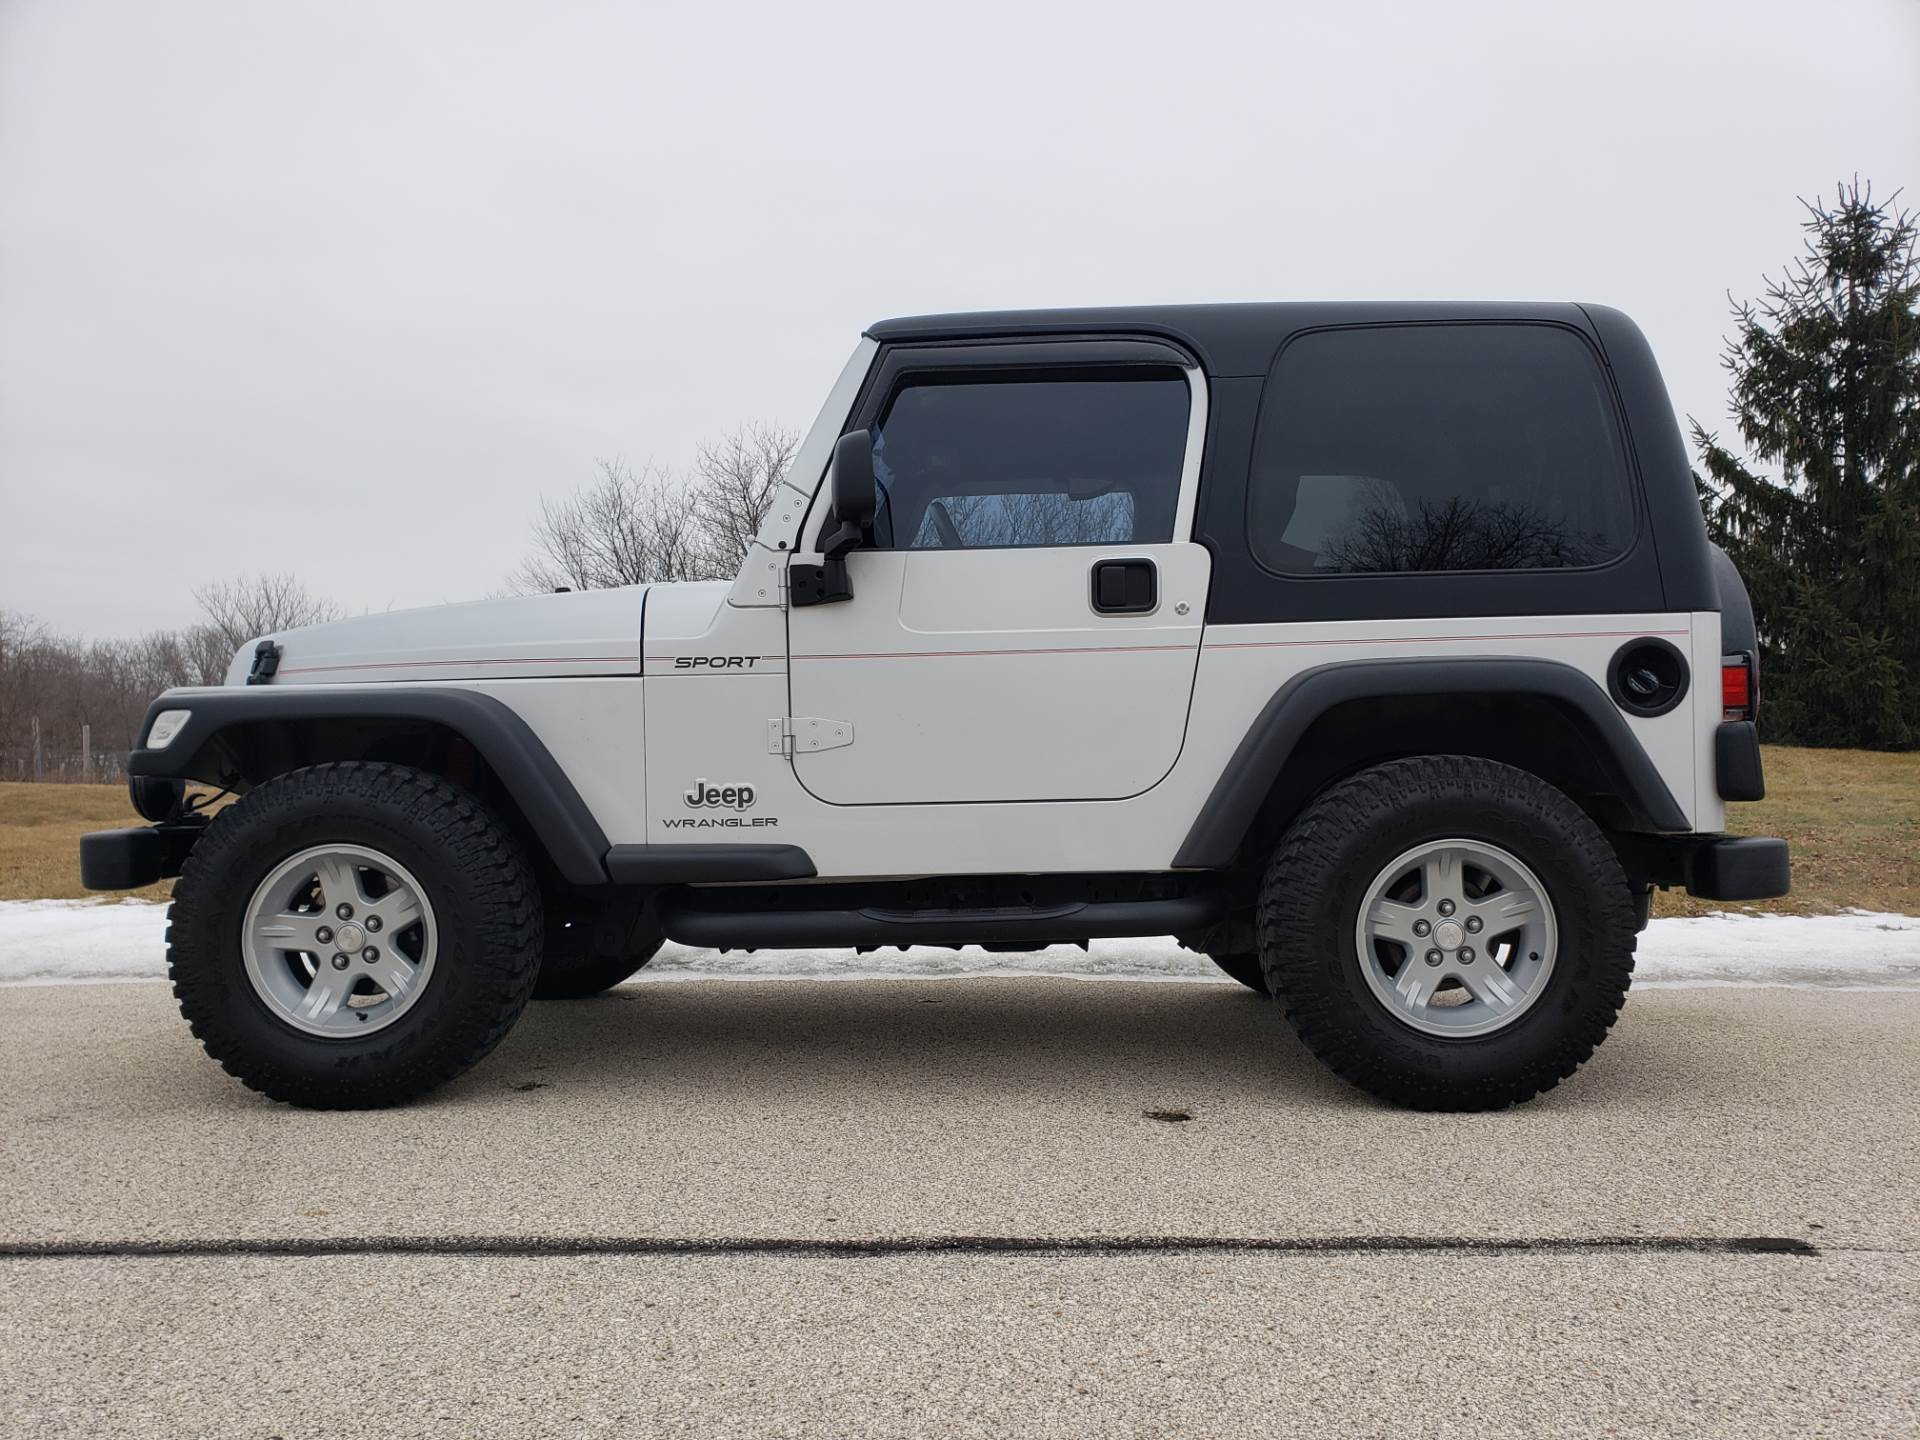 Used 2003 Jeep Wrangler Sport | Automobile in Big Bend WI | 3089 Silver